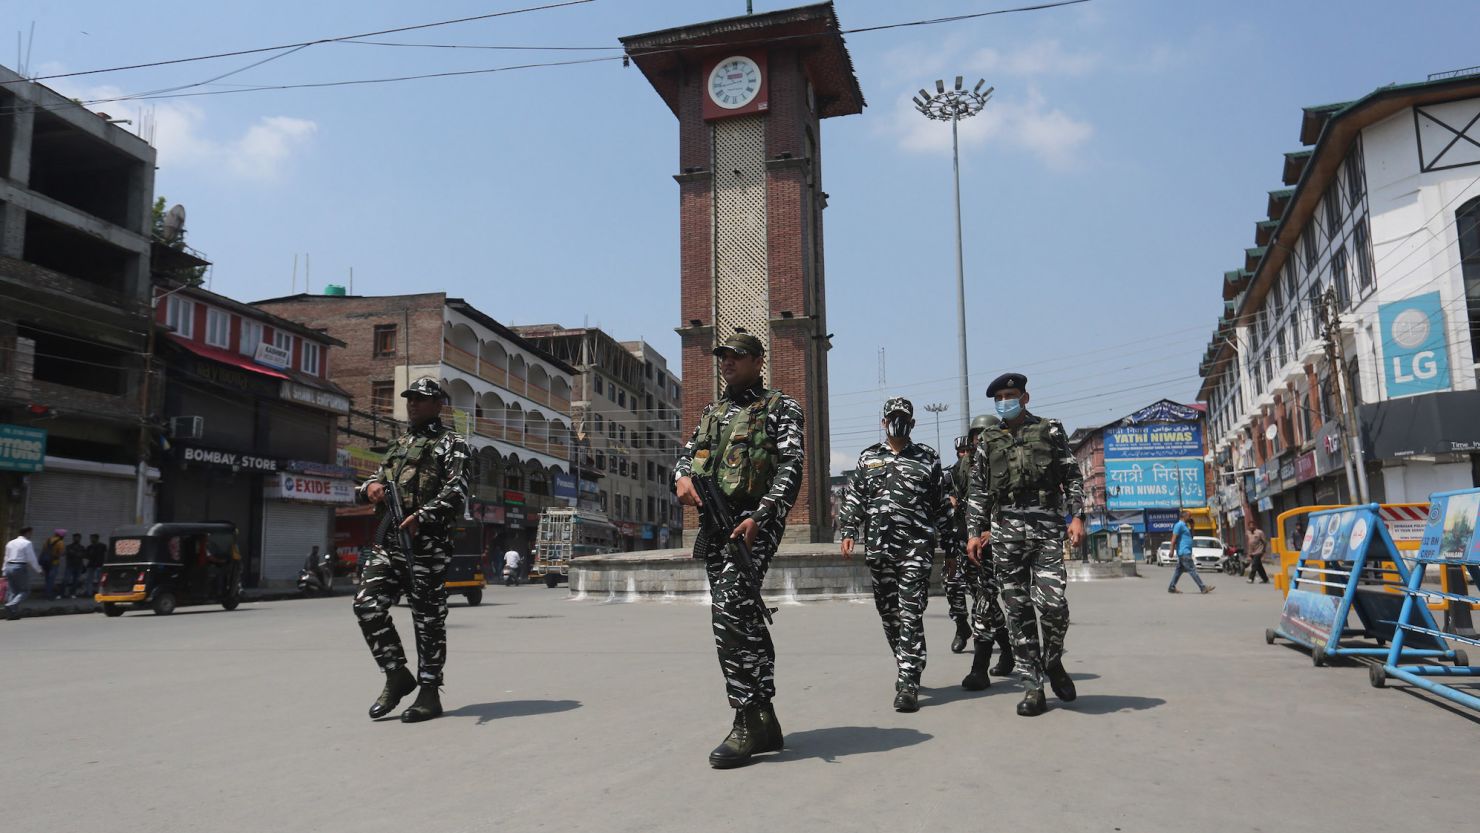 Paramilitary soldiers patrol a street during a protest march on June 10, 2022 in Srinagar, India.